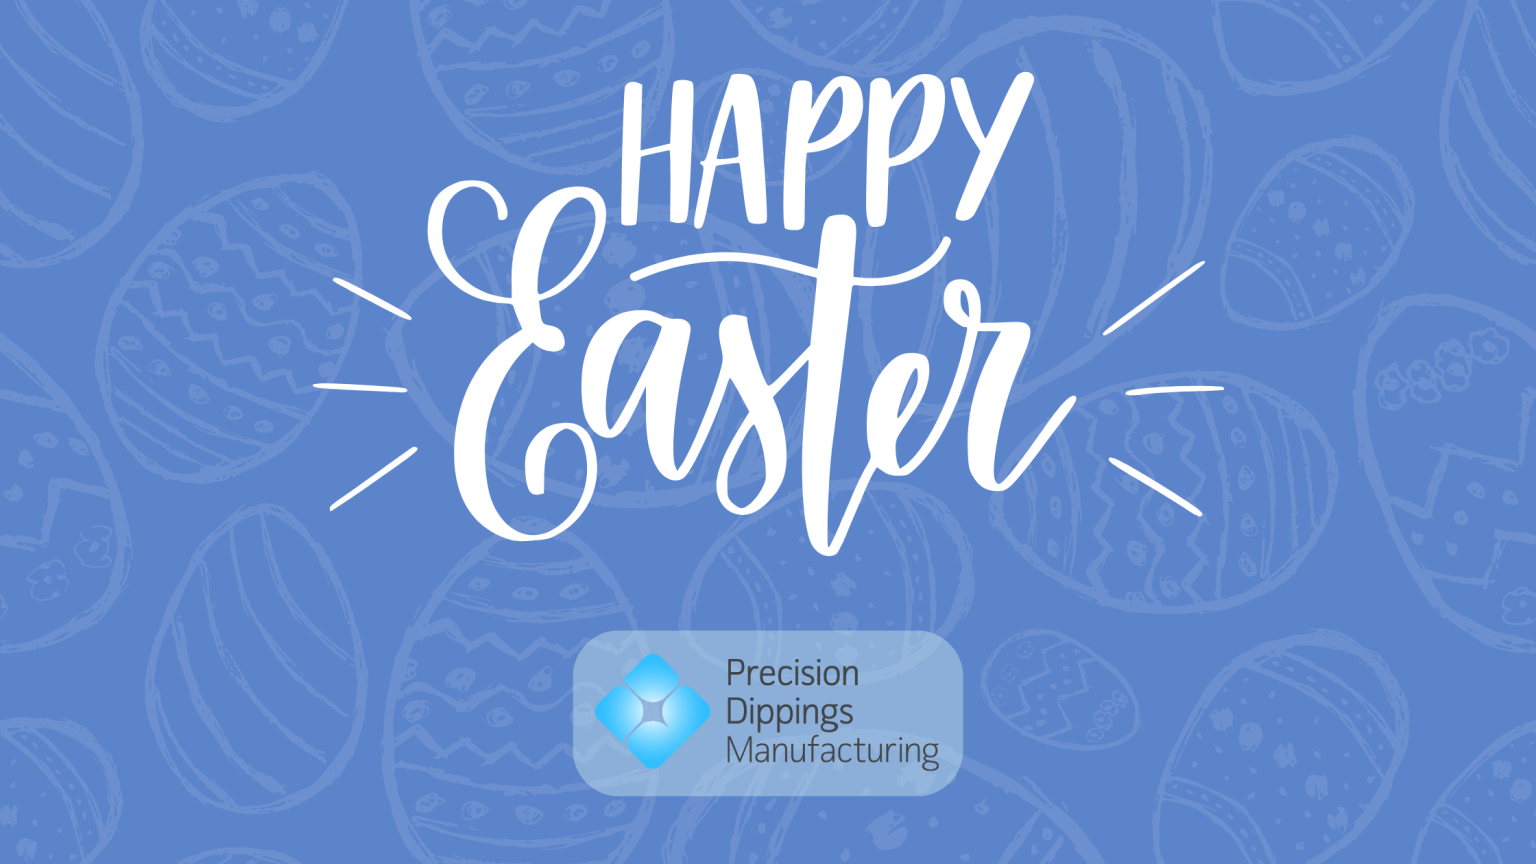 Happy Easter from Precision Dipping Manufacturing!